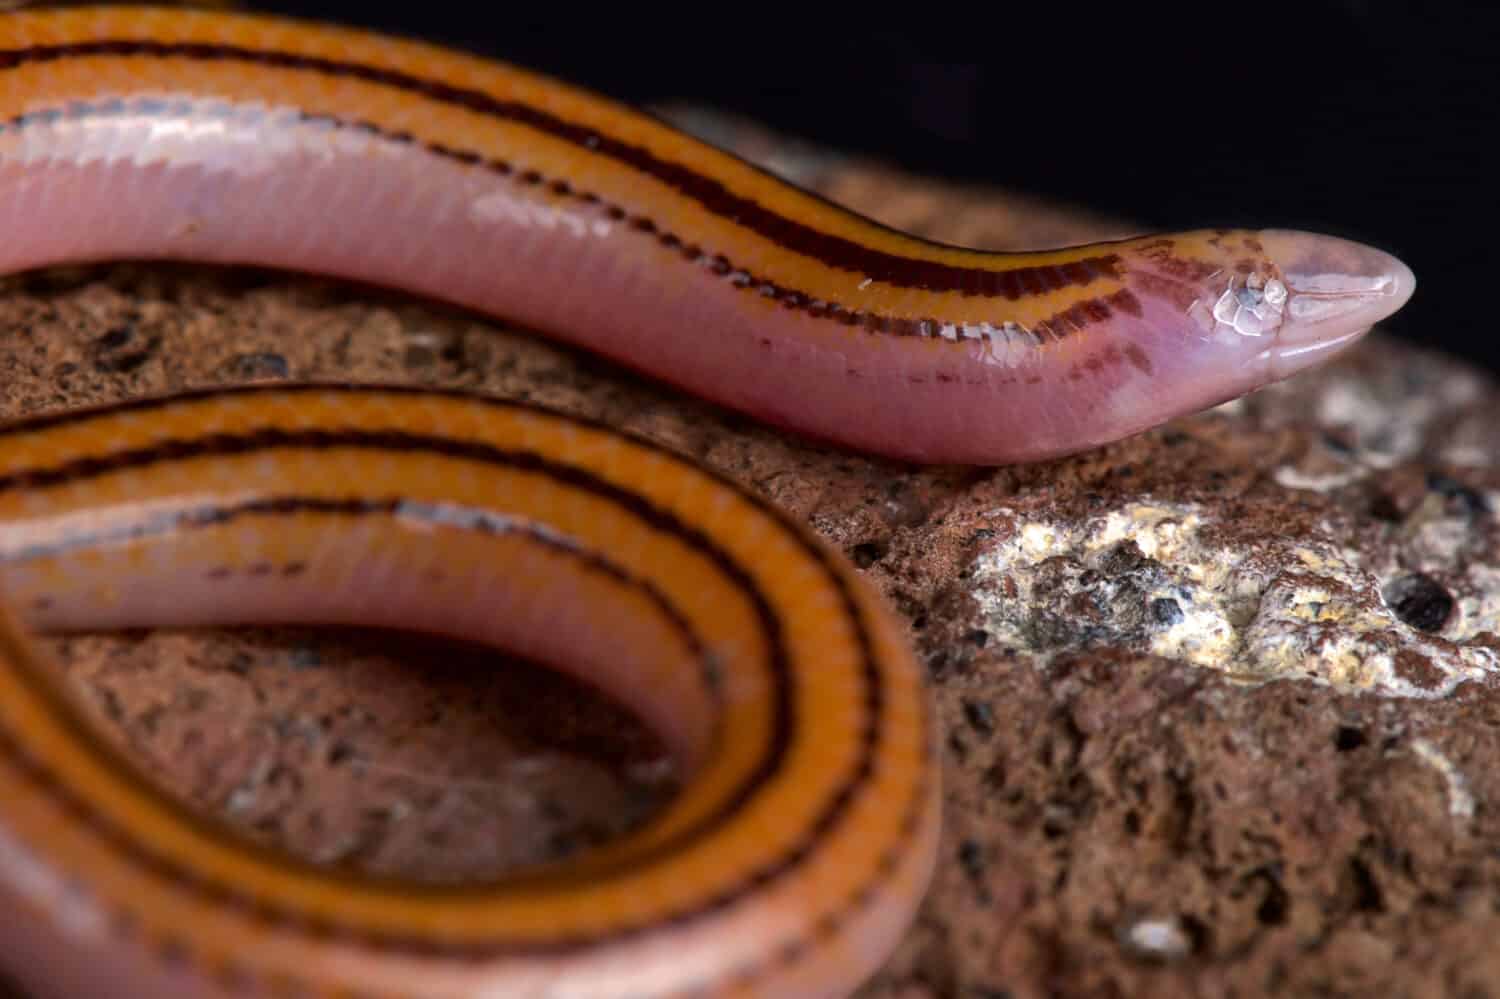 The Striped Legless Skink (Acontias lineatus) is a fossorial lizard species found across Southern Africa.